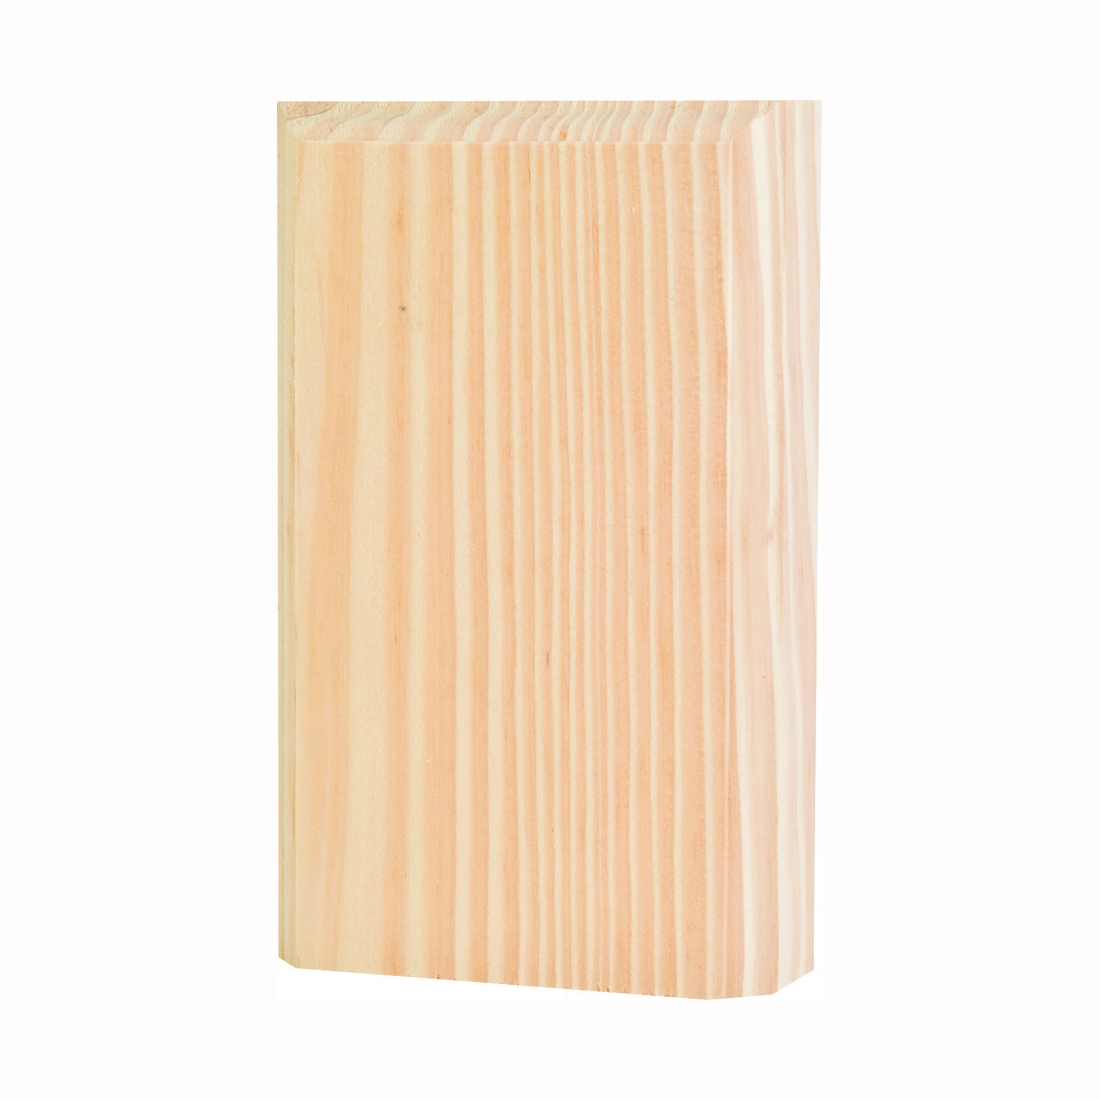 BTB35 Trim Block Moulding, 6 in L, 3-3/4 in W, 1 in Thick, Pine Wood